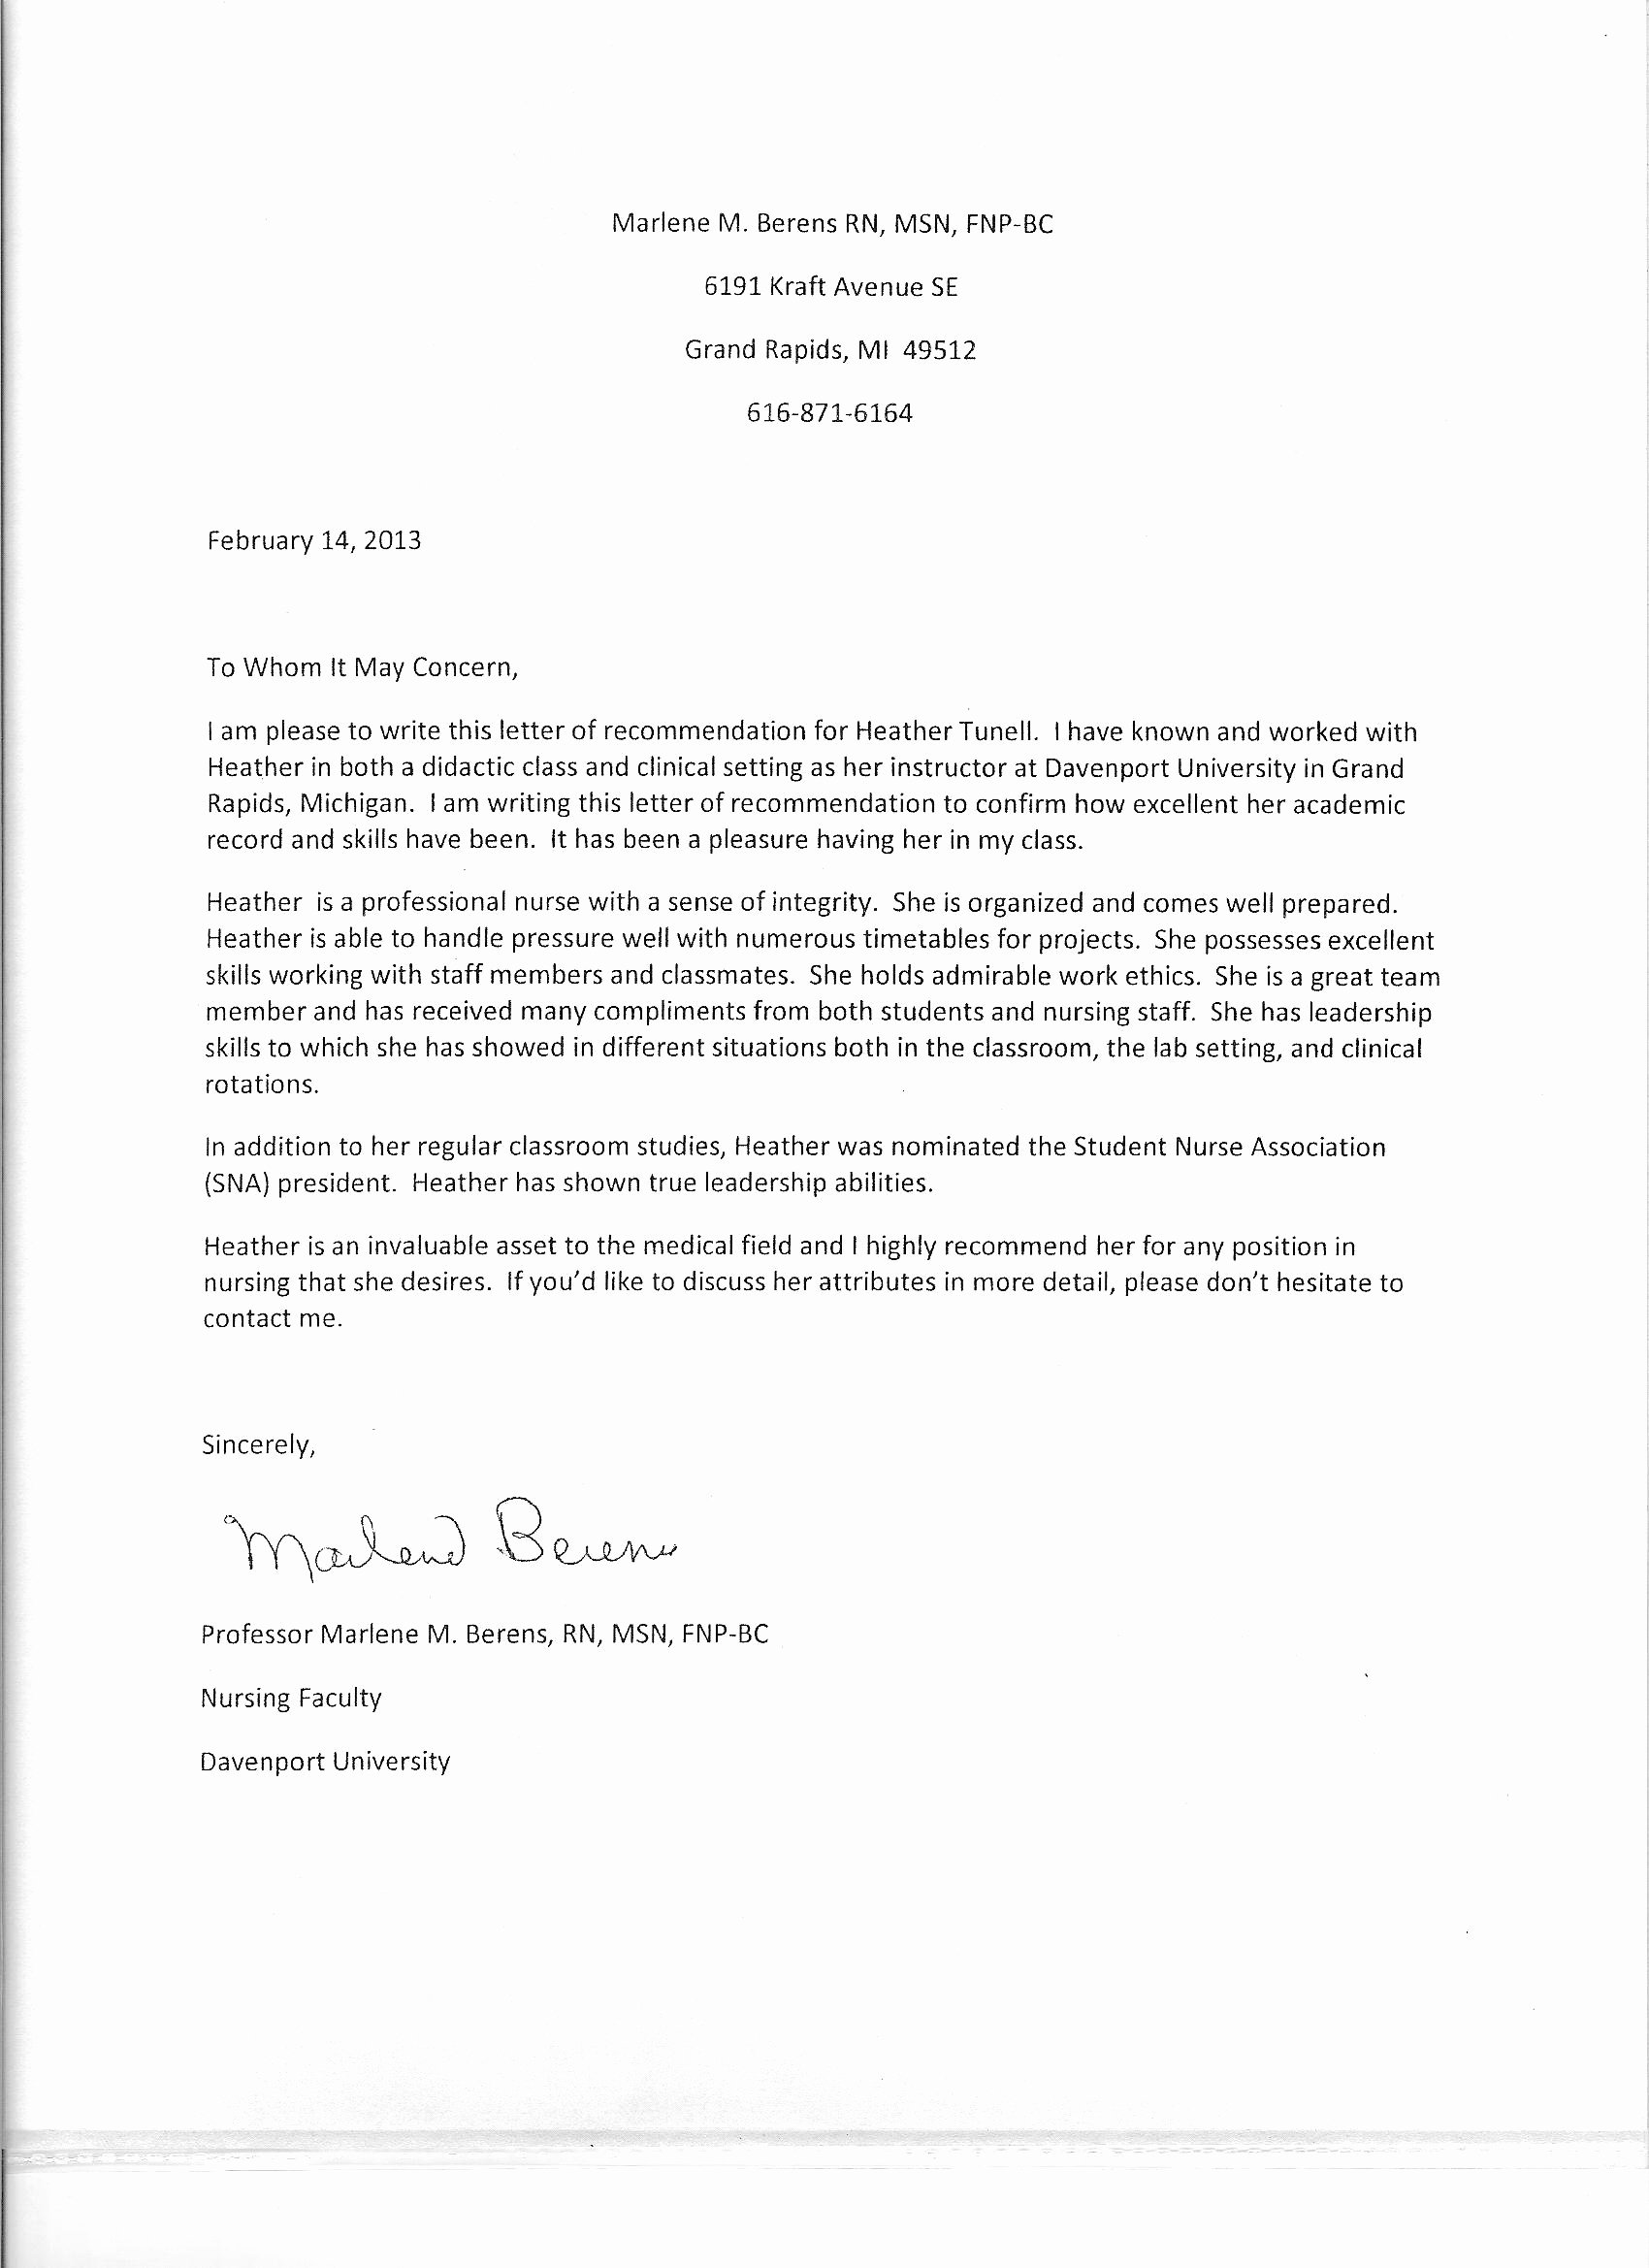 Rn Letter Of Recommendation Unique Certificates Awards and Reference Letters Nursing Portfolio